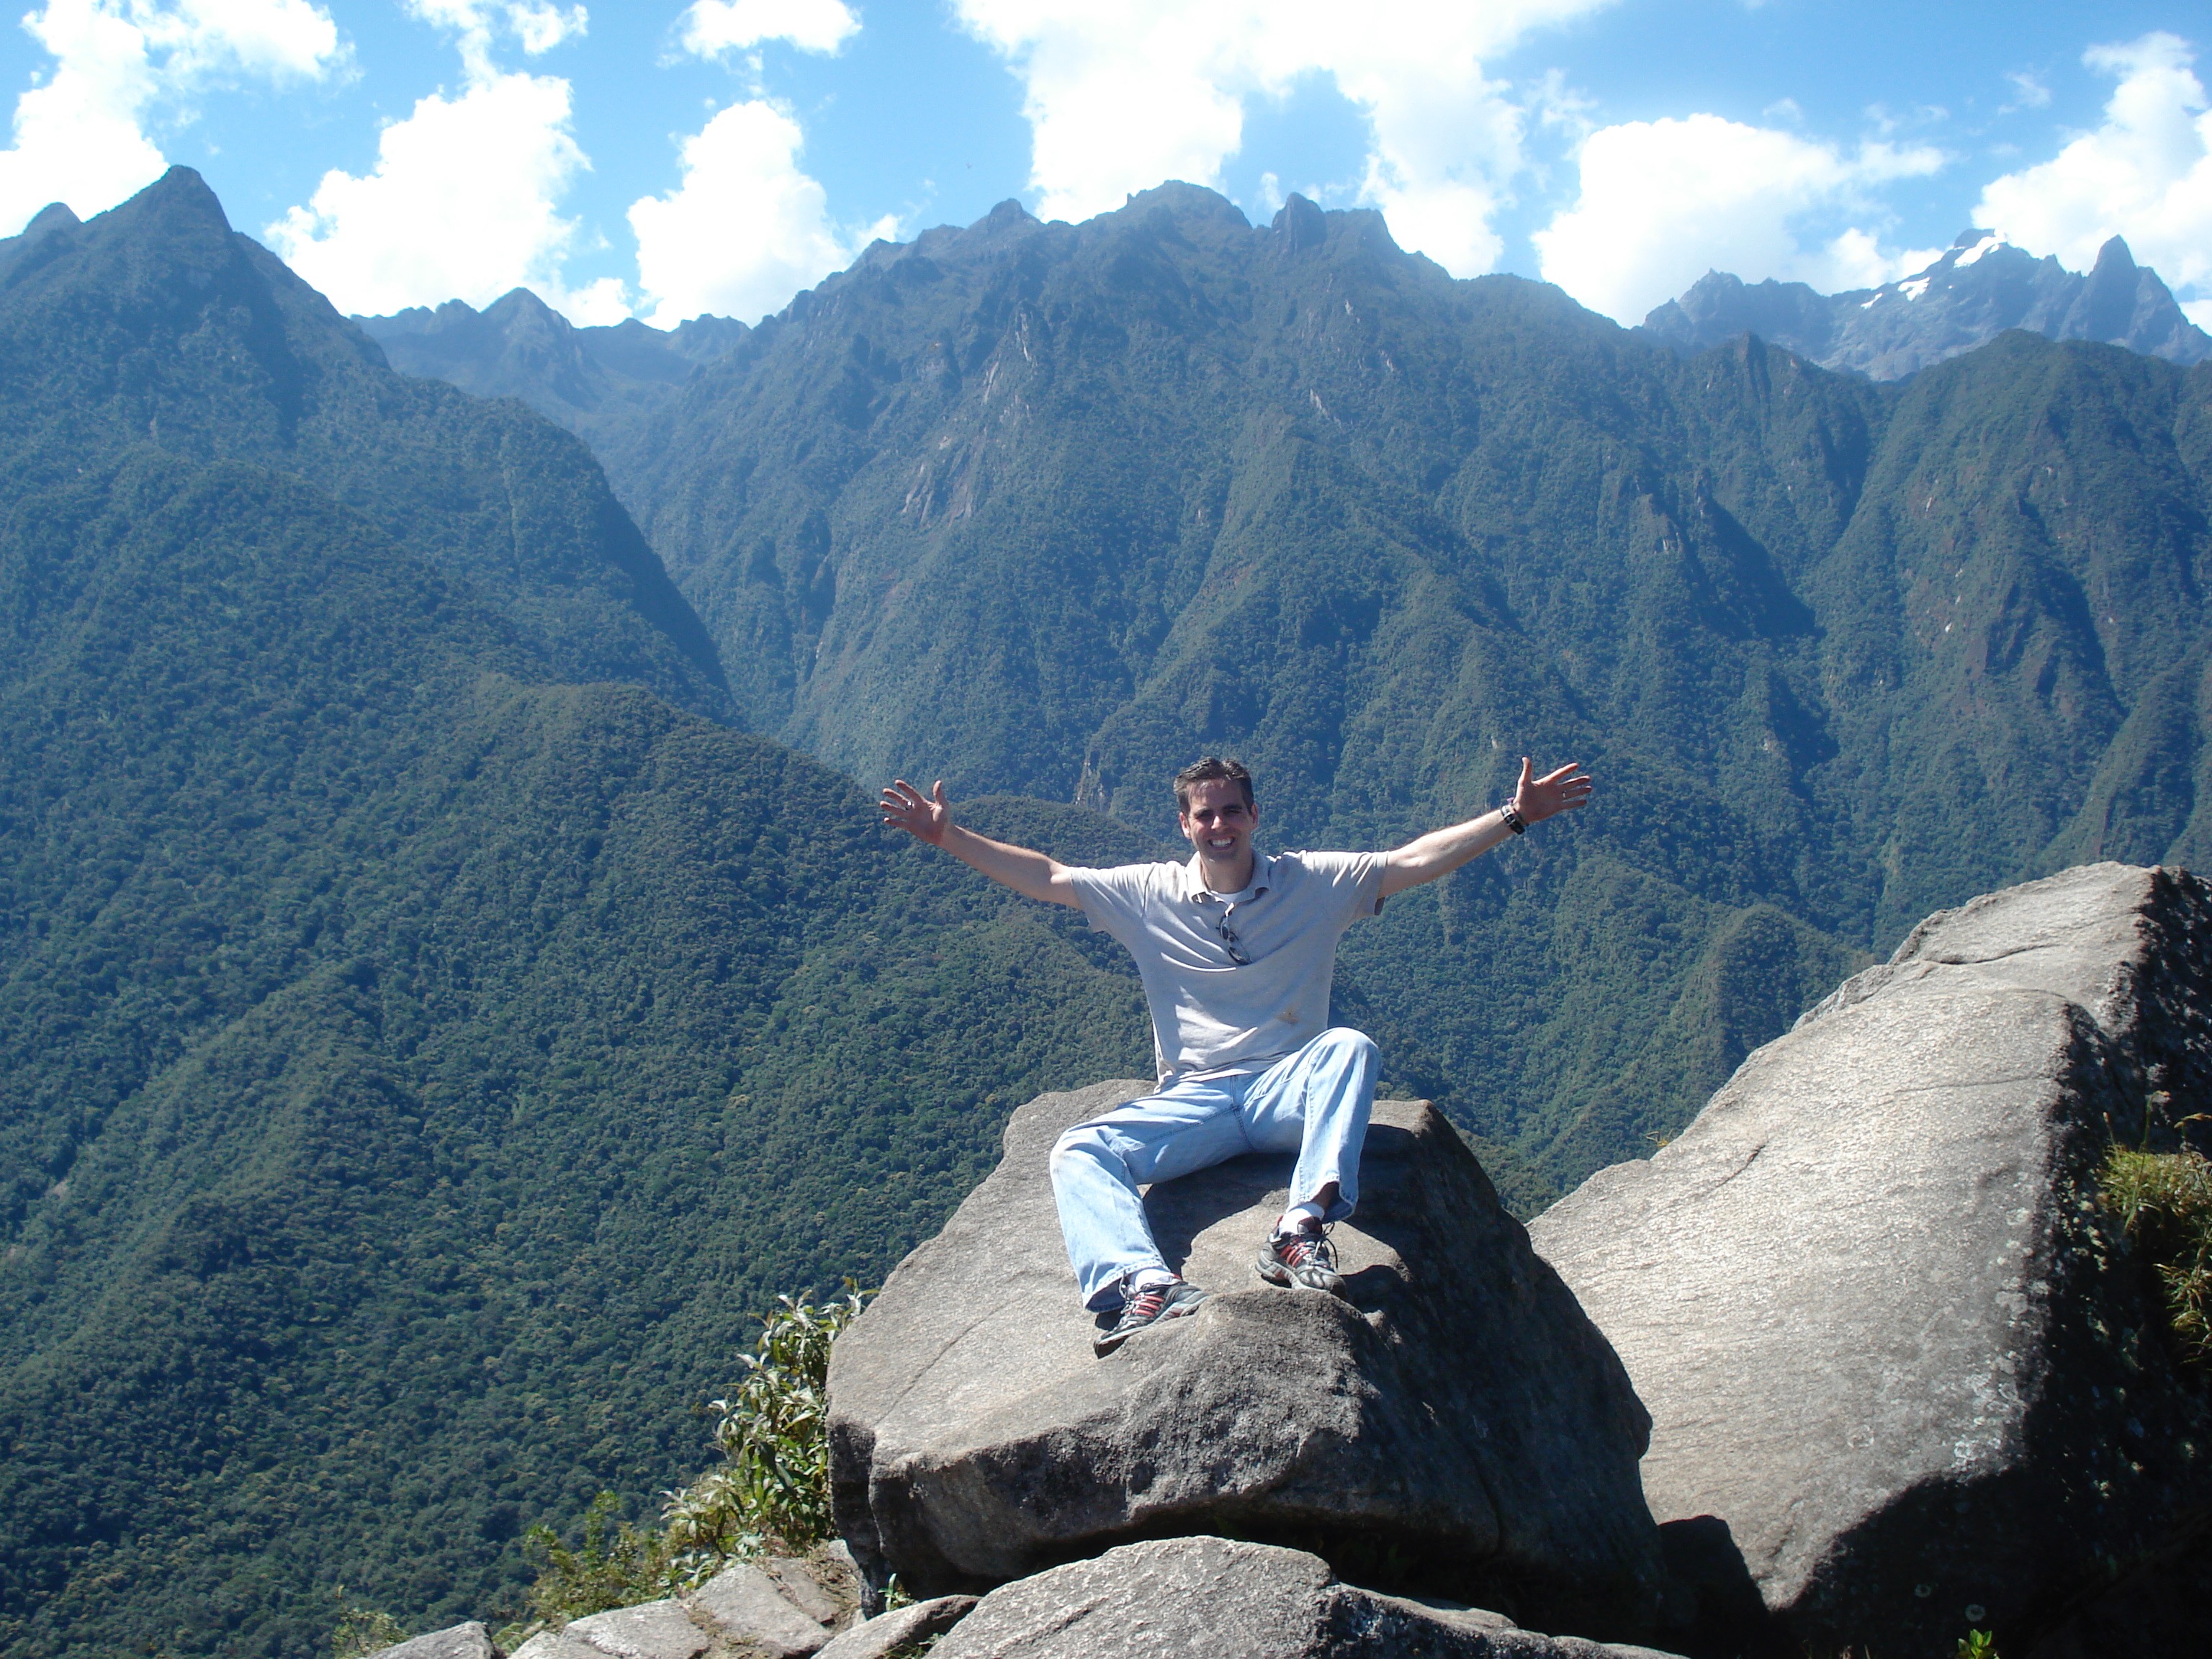 What I learned while climbing above Macchu Picchu